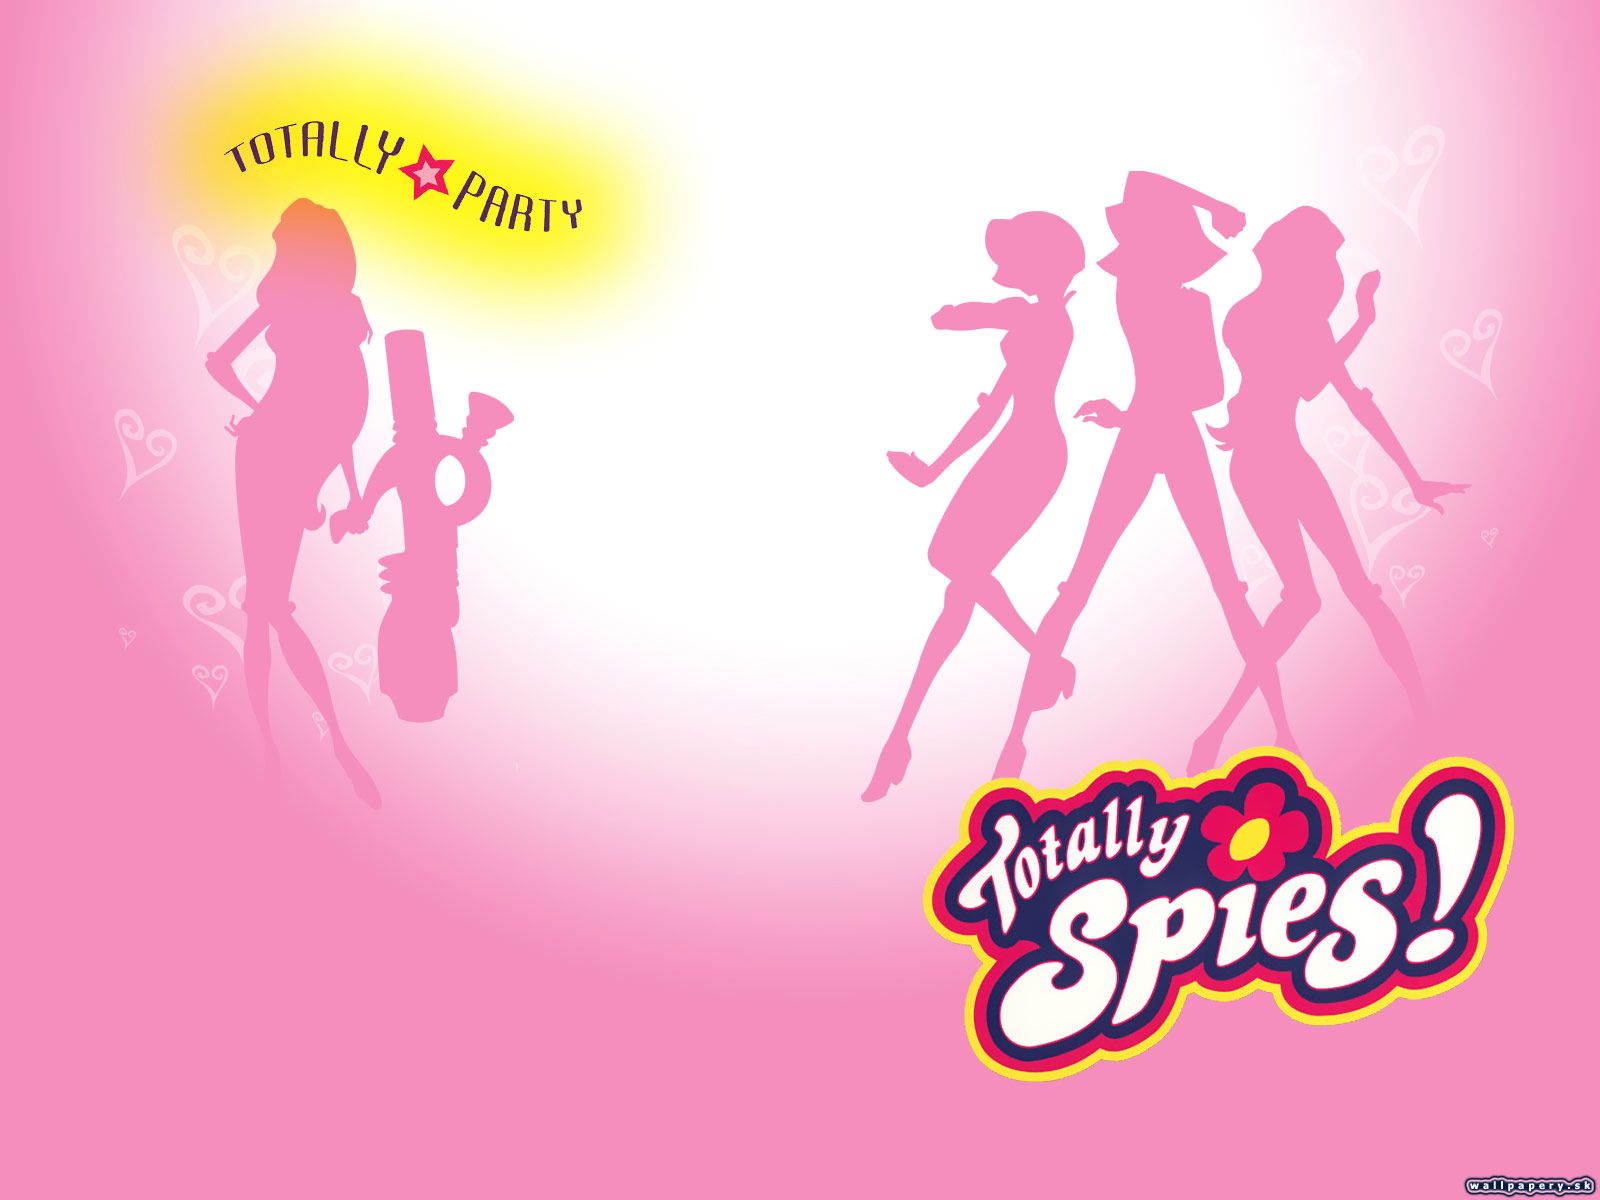 Totally Spies! Totally Party - wallpaper 2 | ABCgames.cz